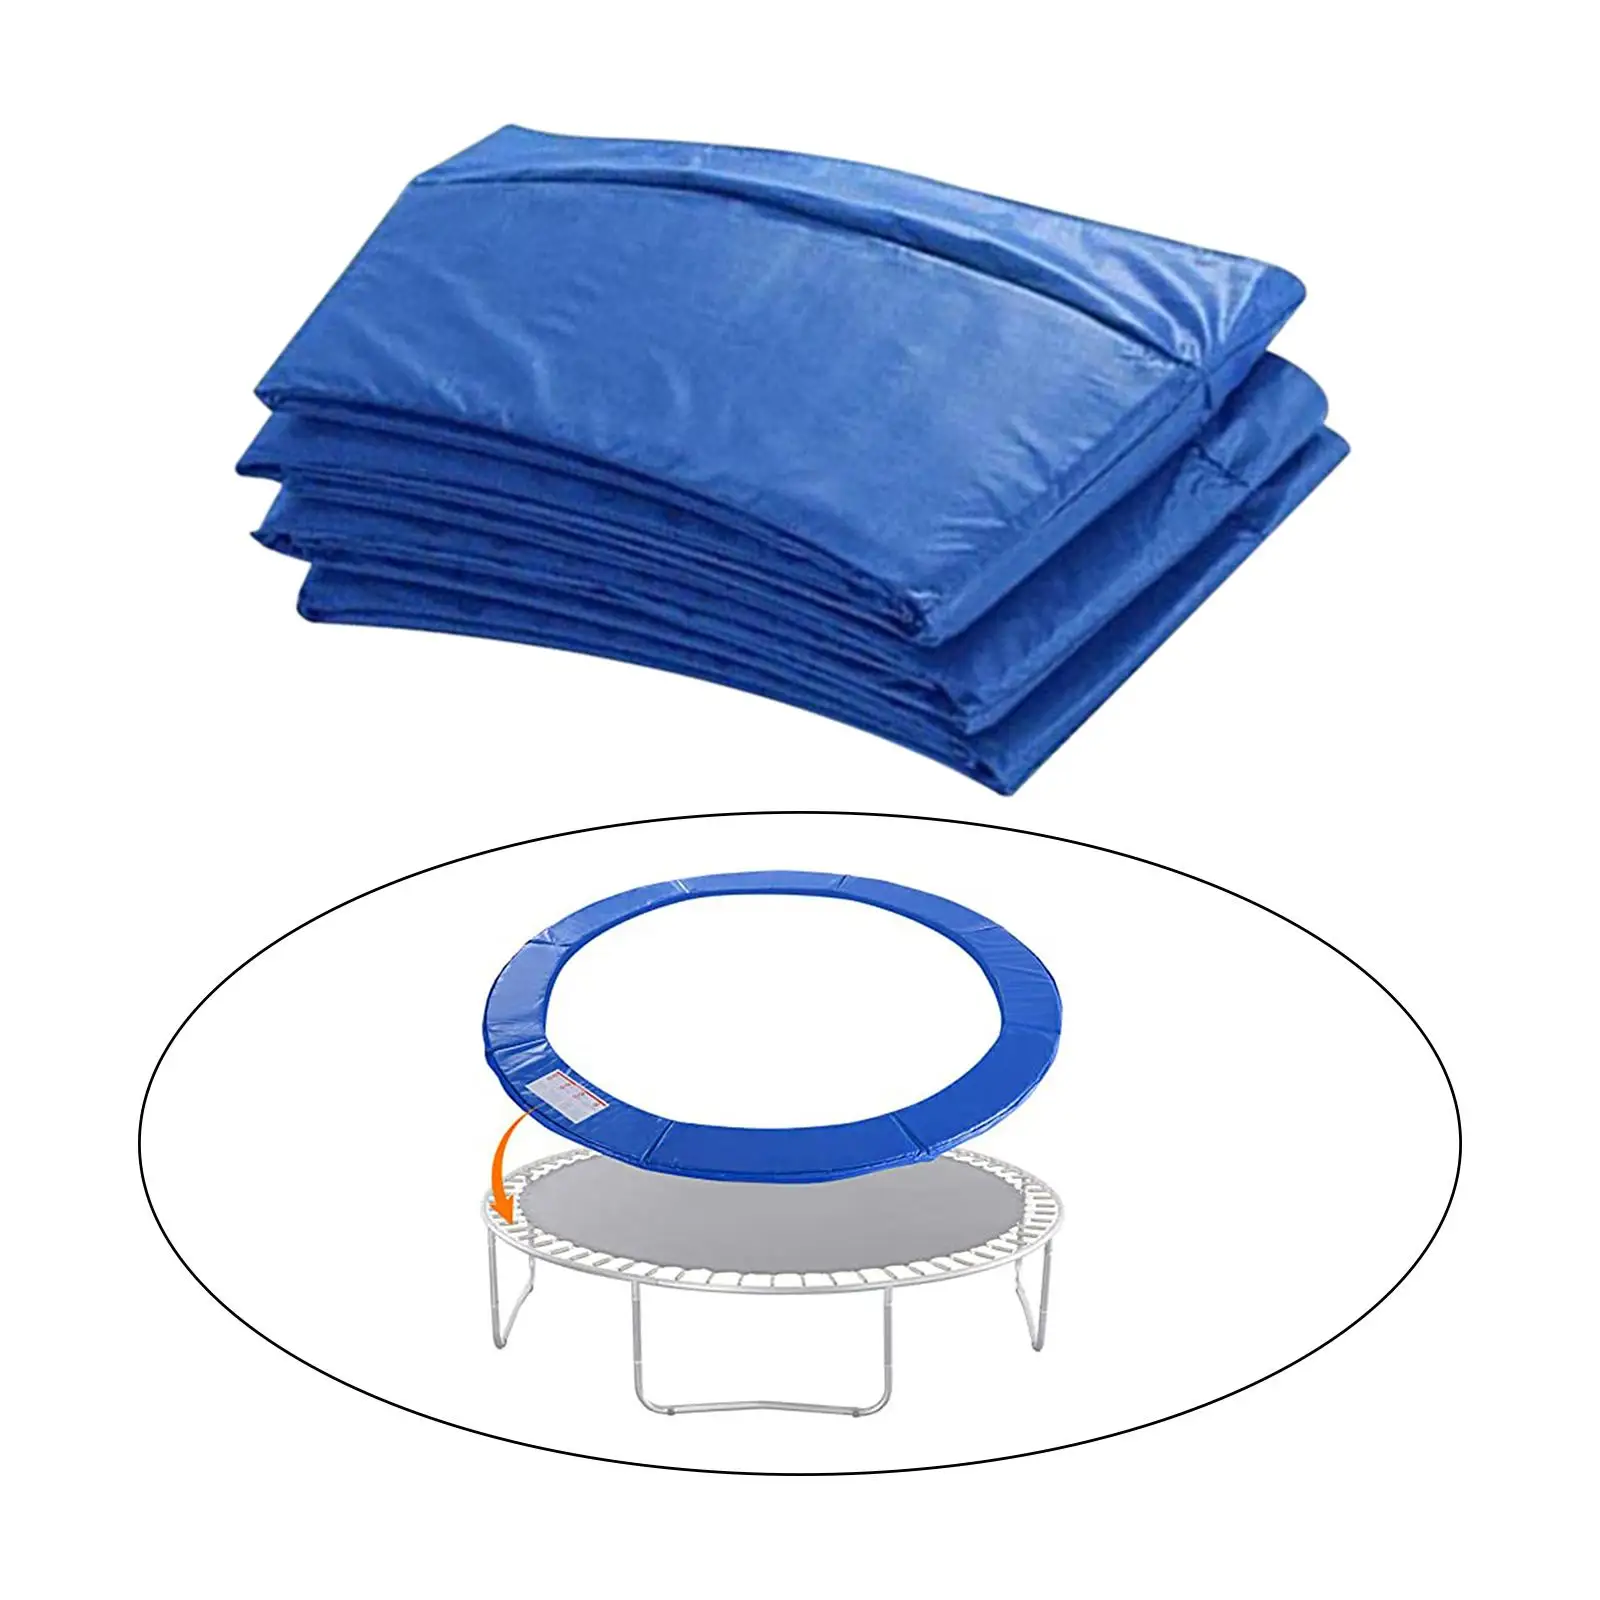 Trampoline Pad Side Guard Fits Round Trampoline 12ft Jumping Bed Side Cover Epe Pad Waterproof No Holes for Pole Spring Cover